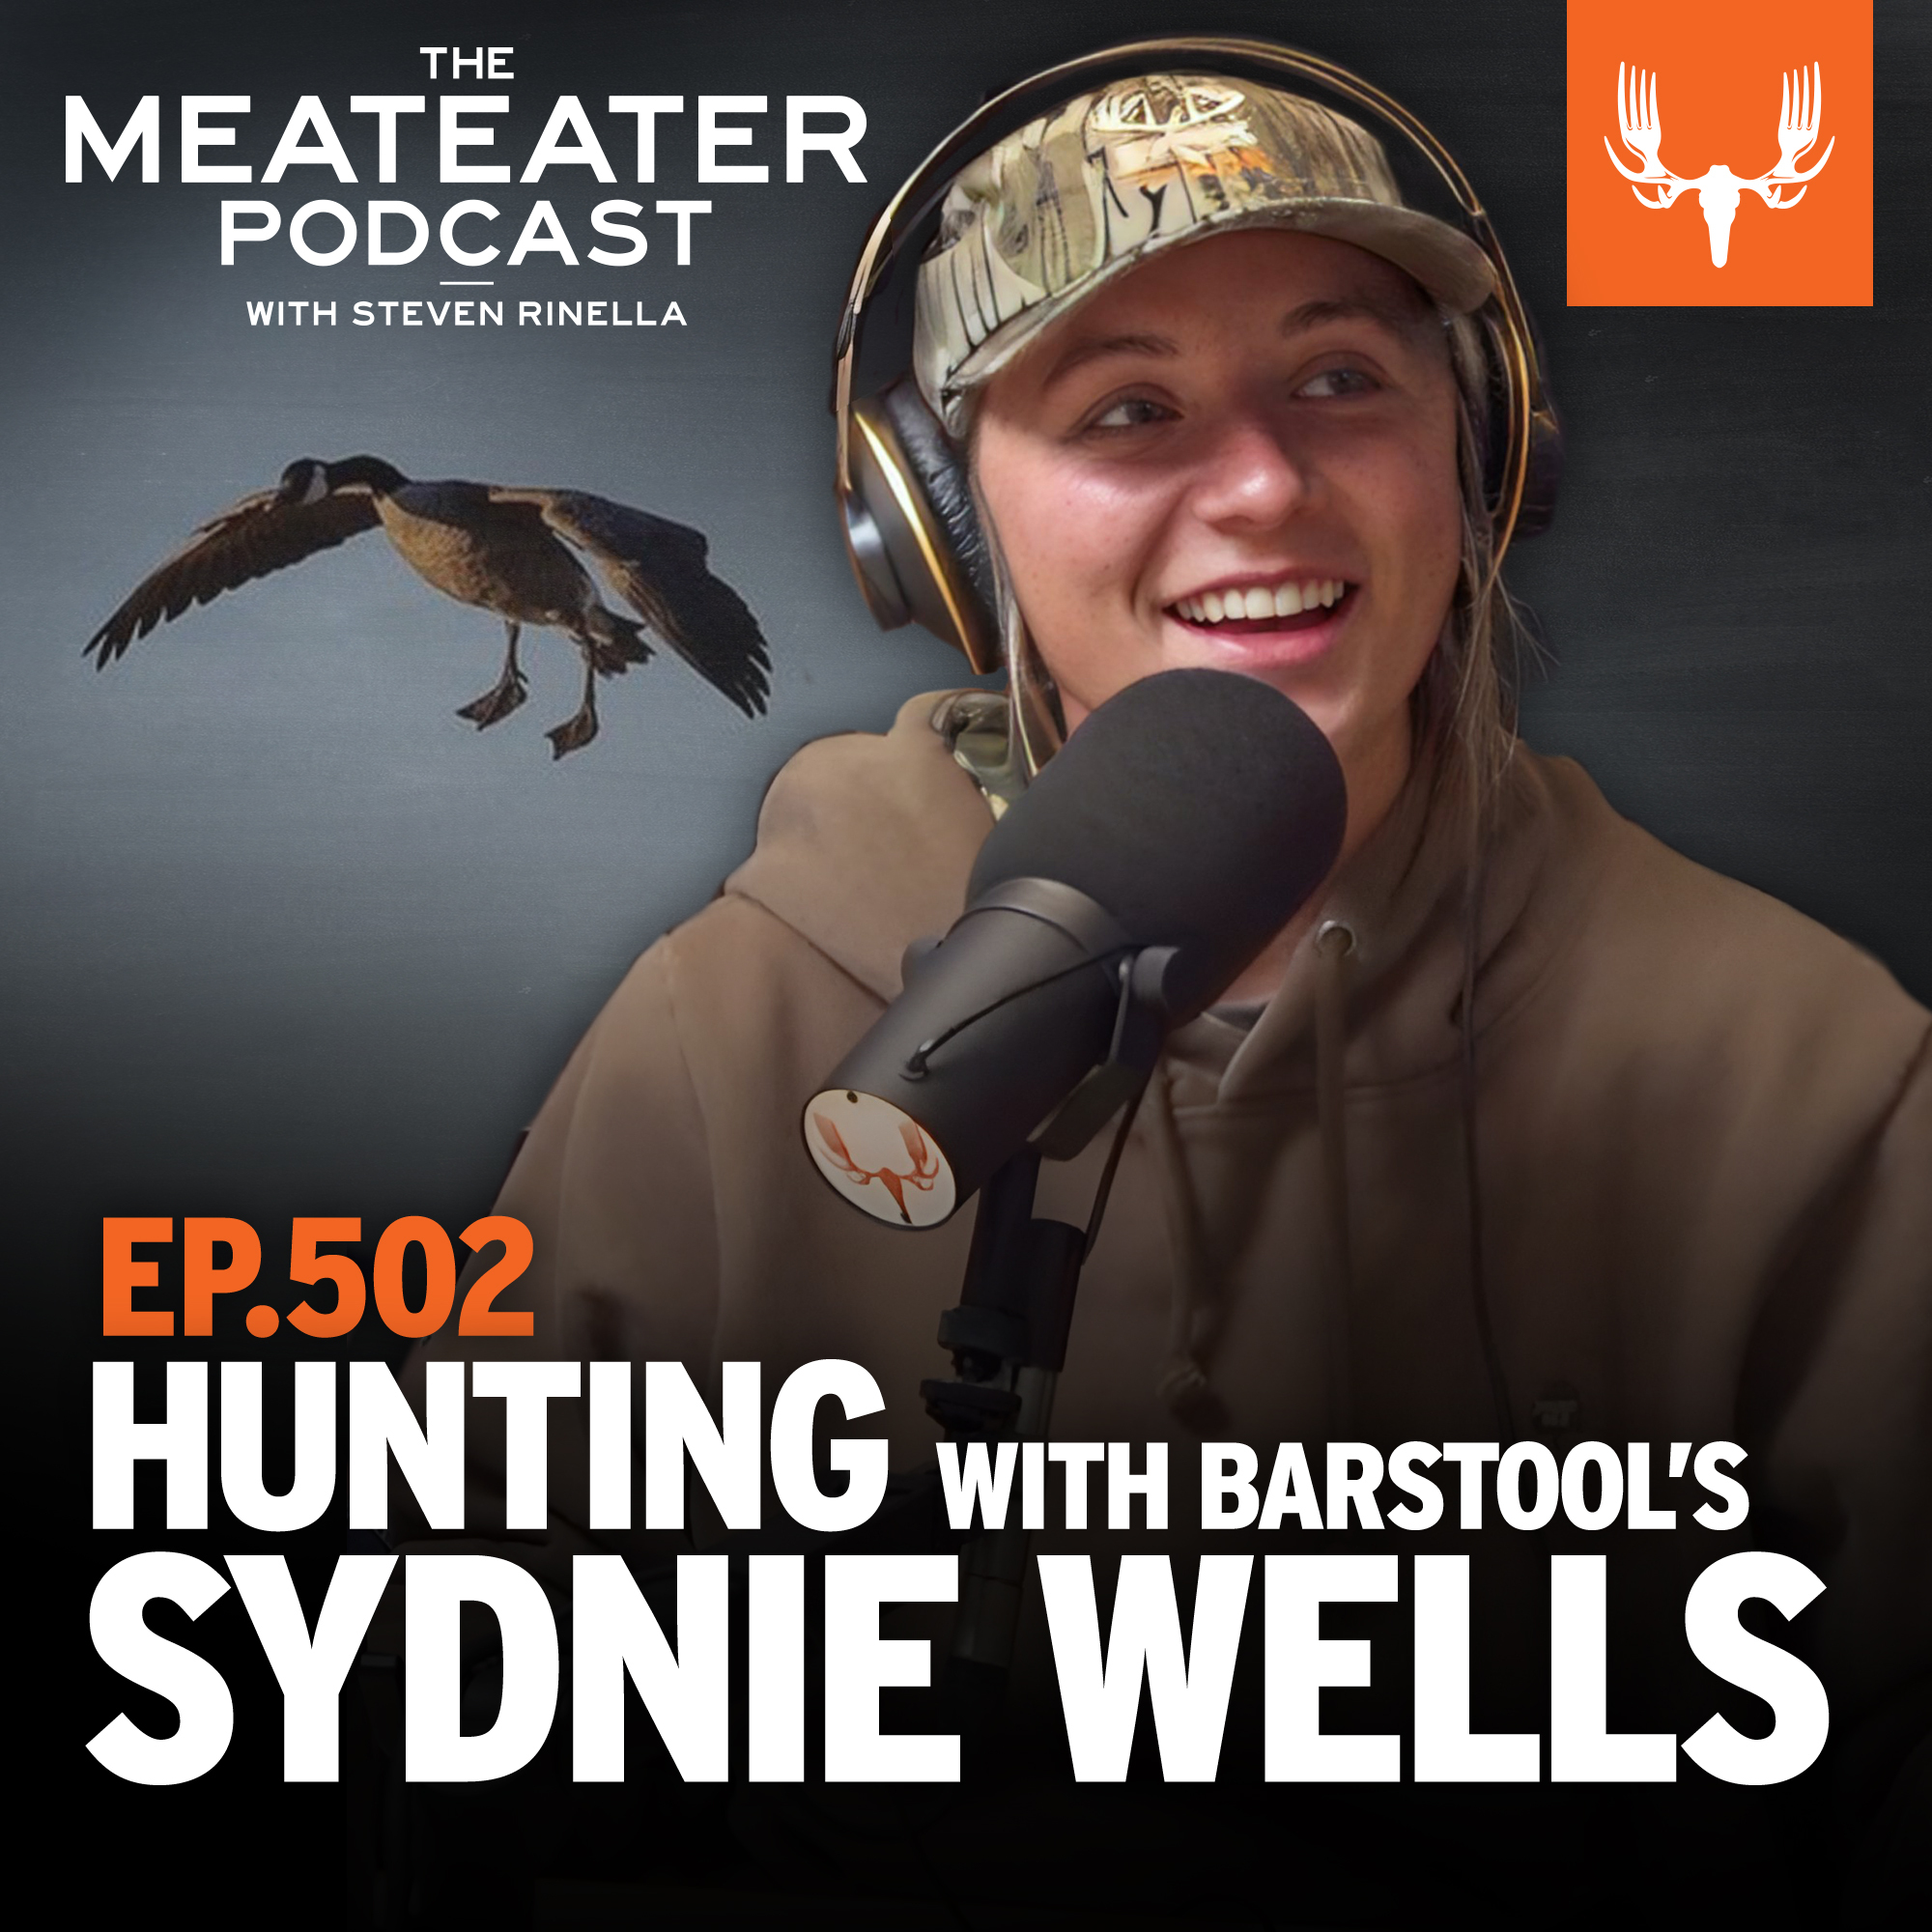 Ep. 502: Hunting with Barstool’s Sydnie Wells